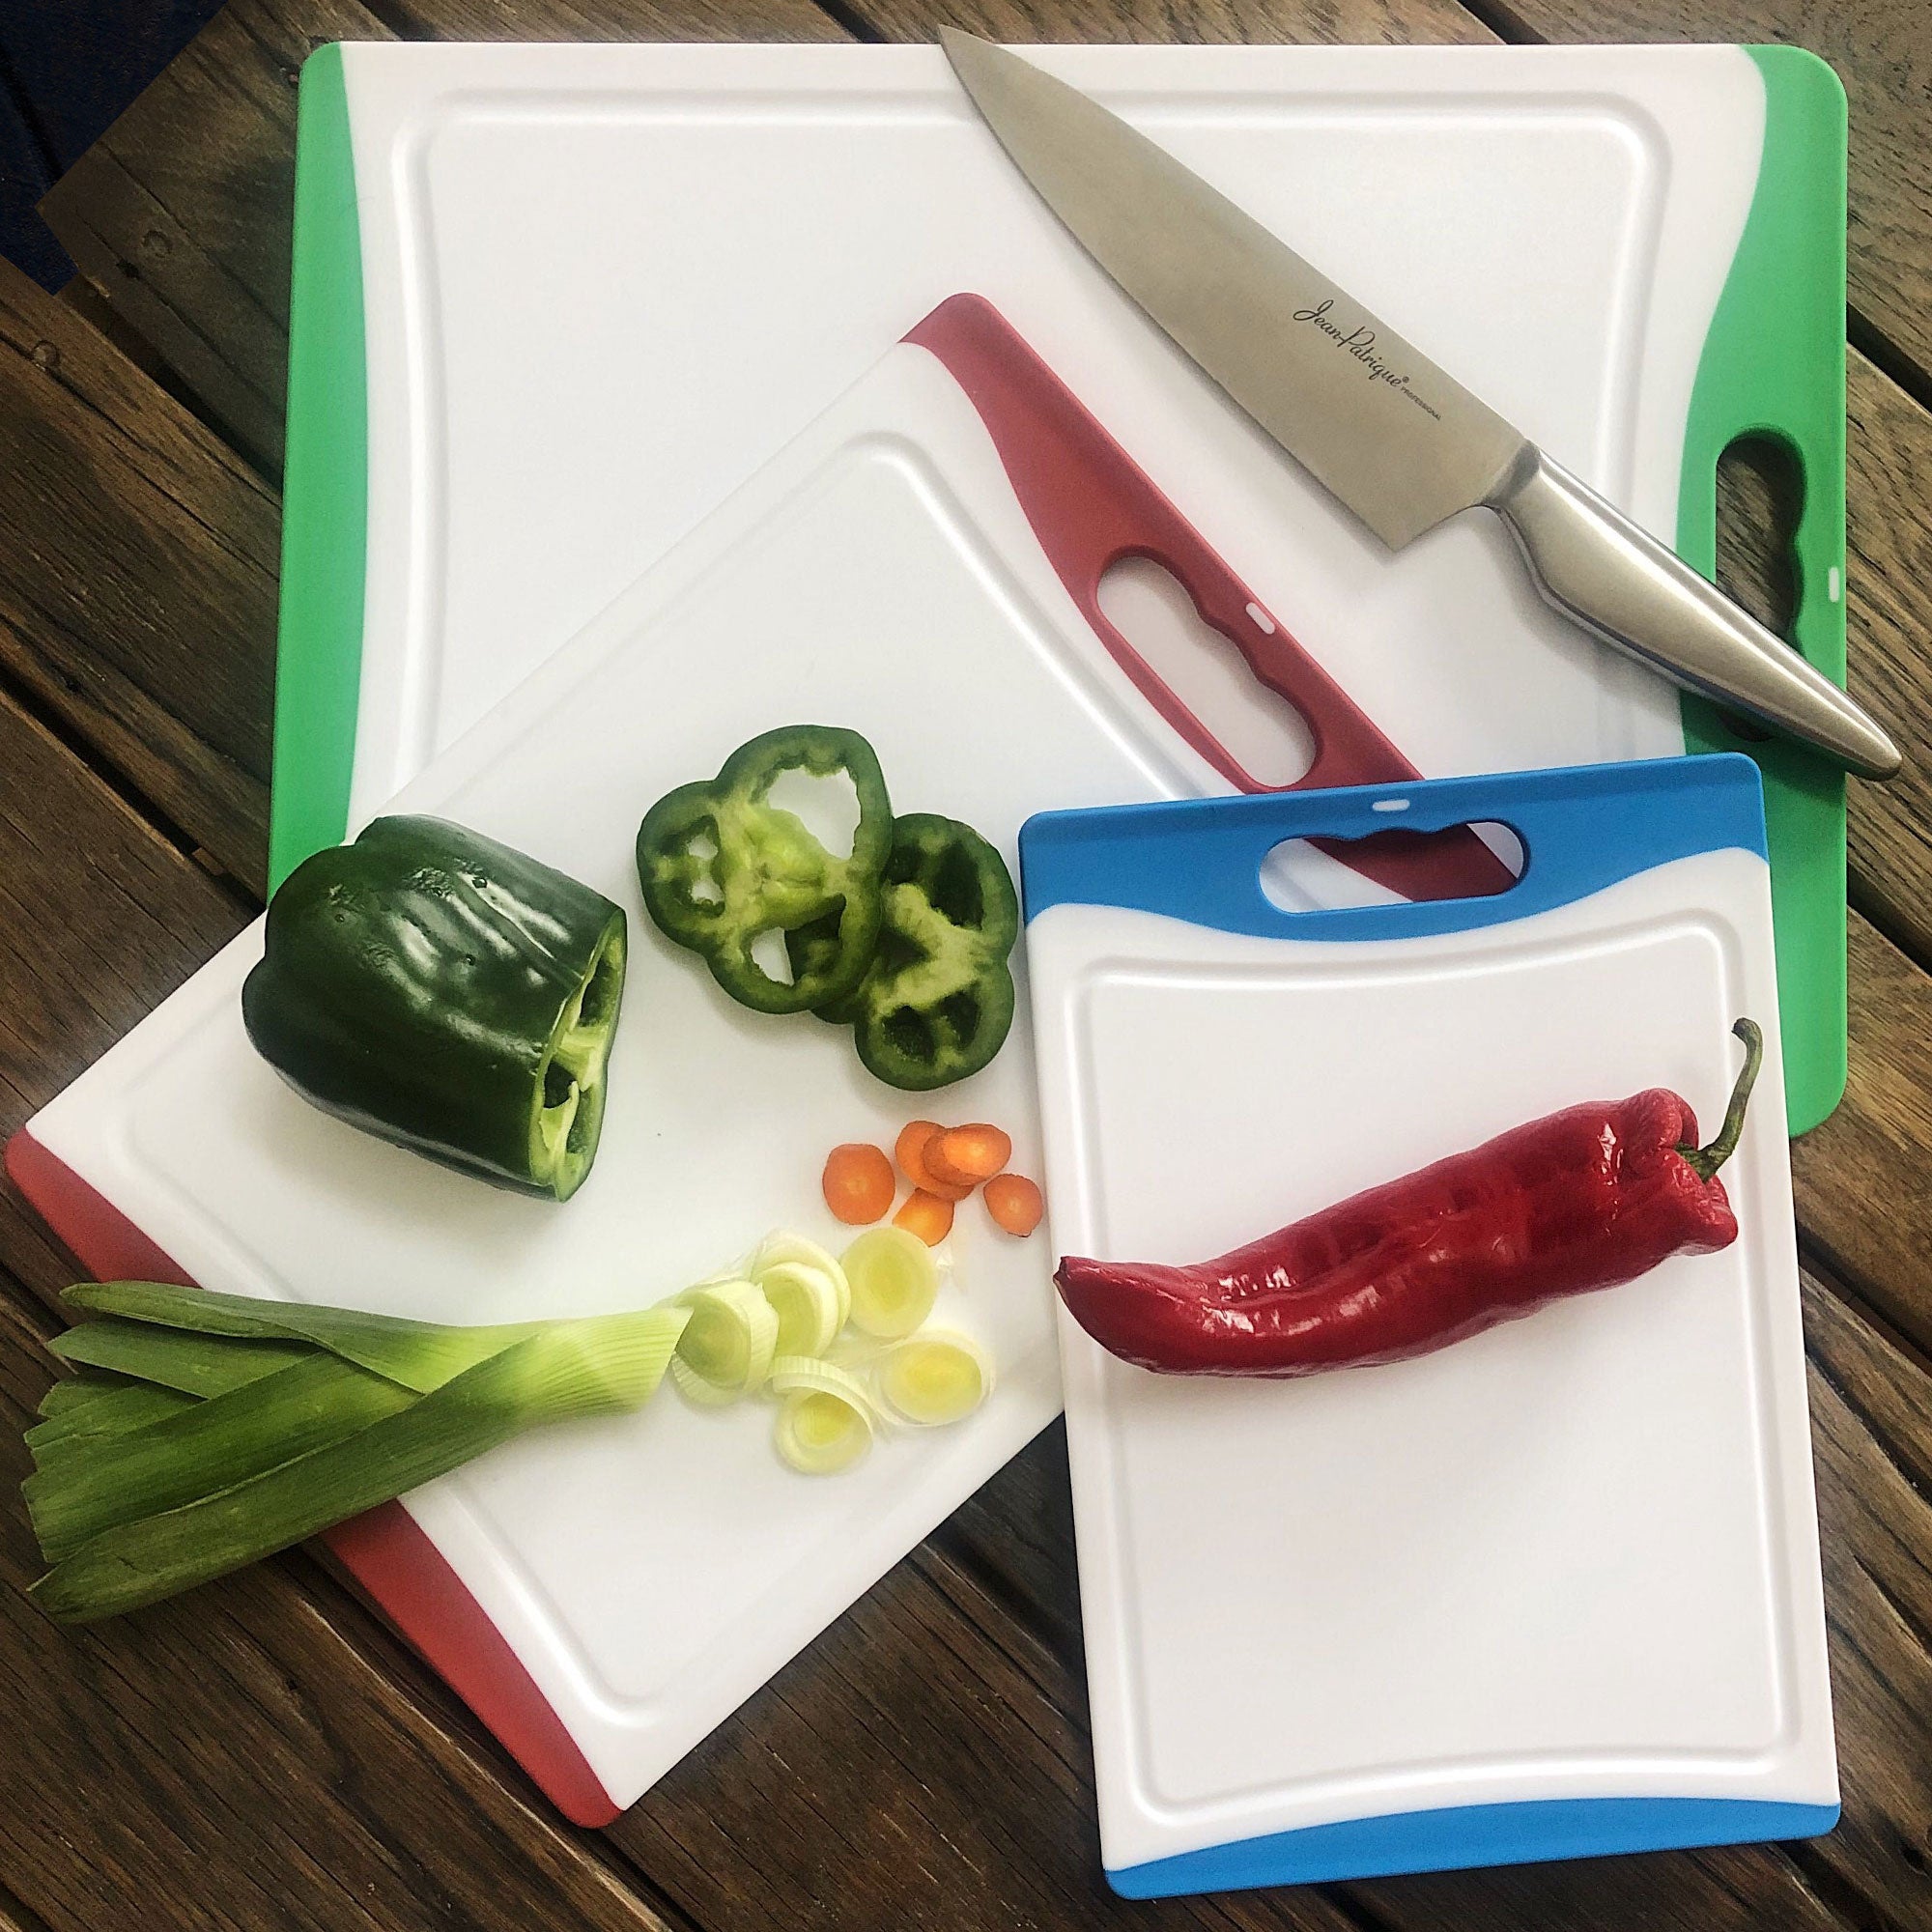 JoyJolt Plastic Cutting Board Set. White and Veri Peri Cutting Boards for Kitchen Dishwasher Safe with Handle. Non Slip Large and Small Chopping